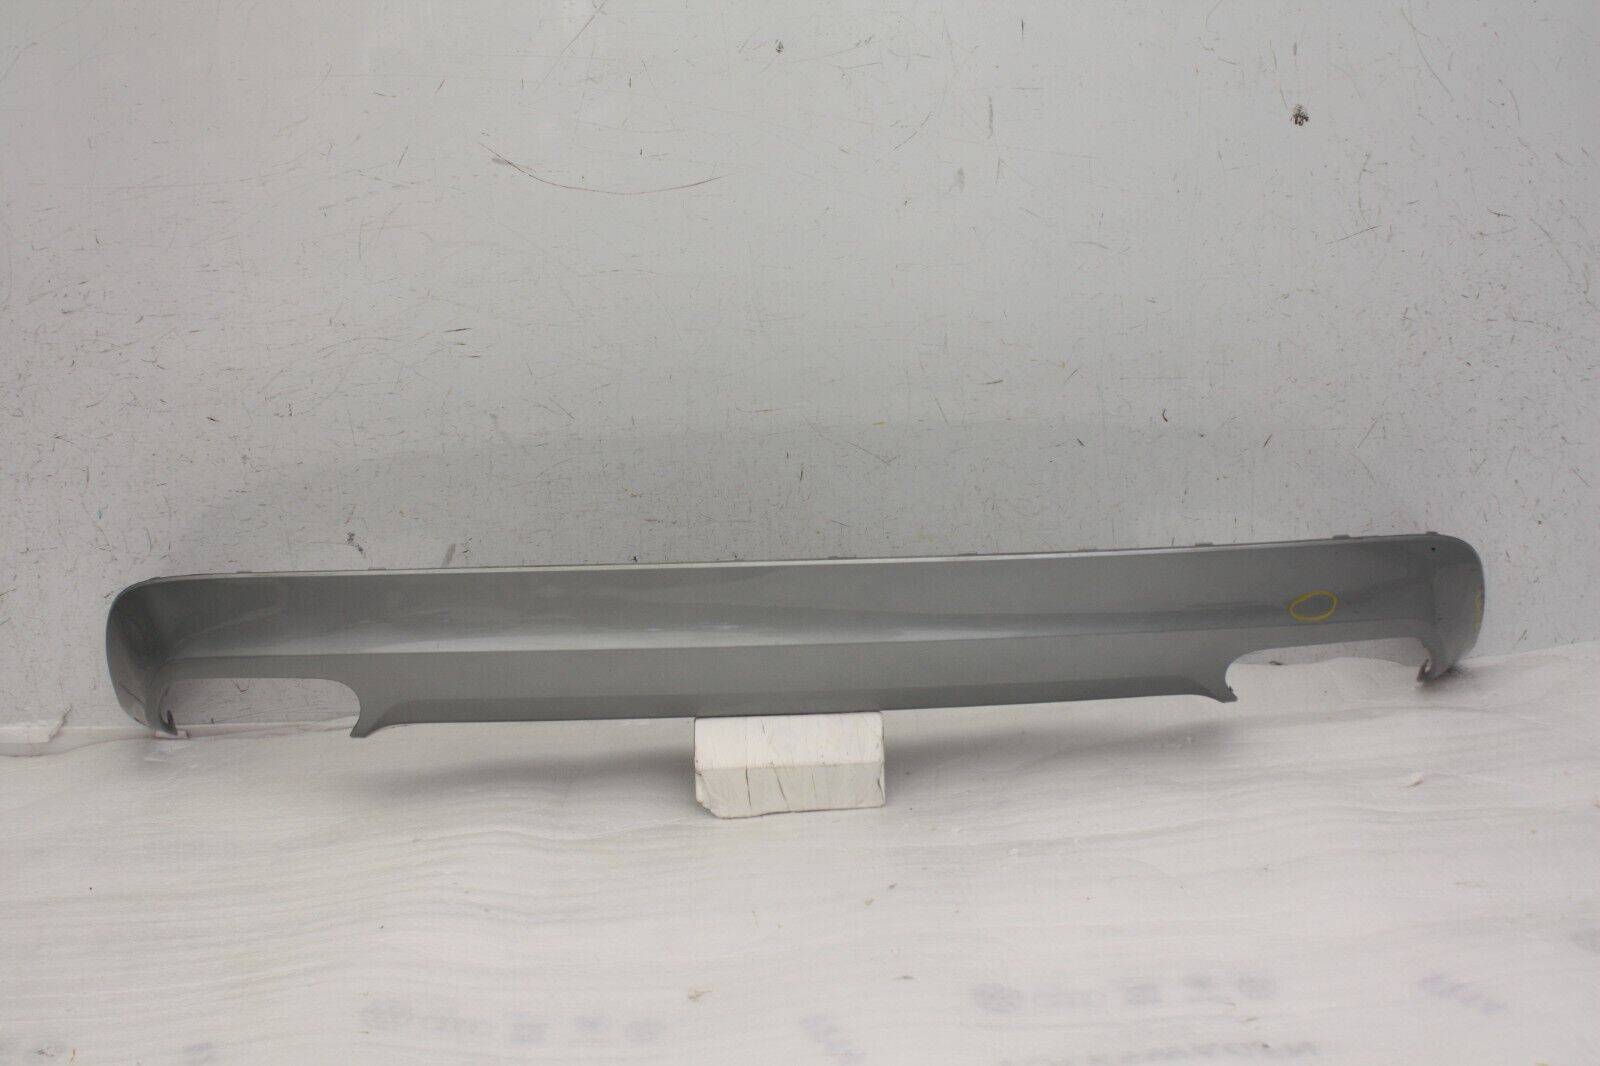 Volvo XC60 Rear Bumper Lower Section 2015 ON 31425207 Genuine 176376582298